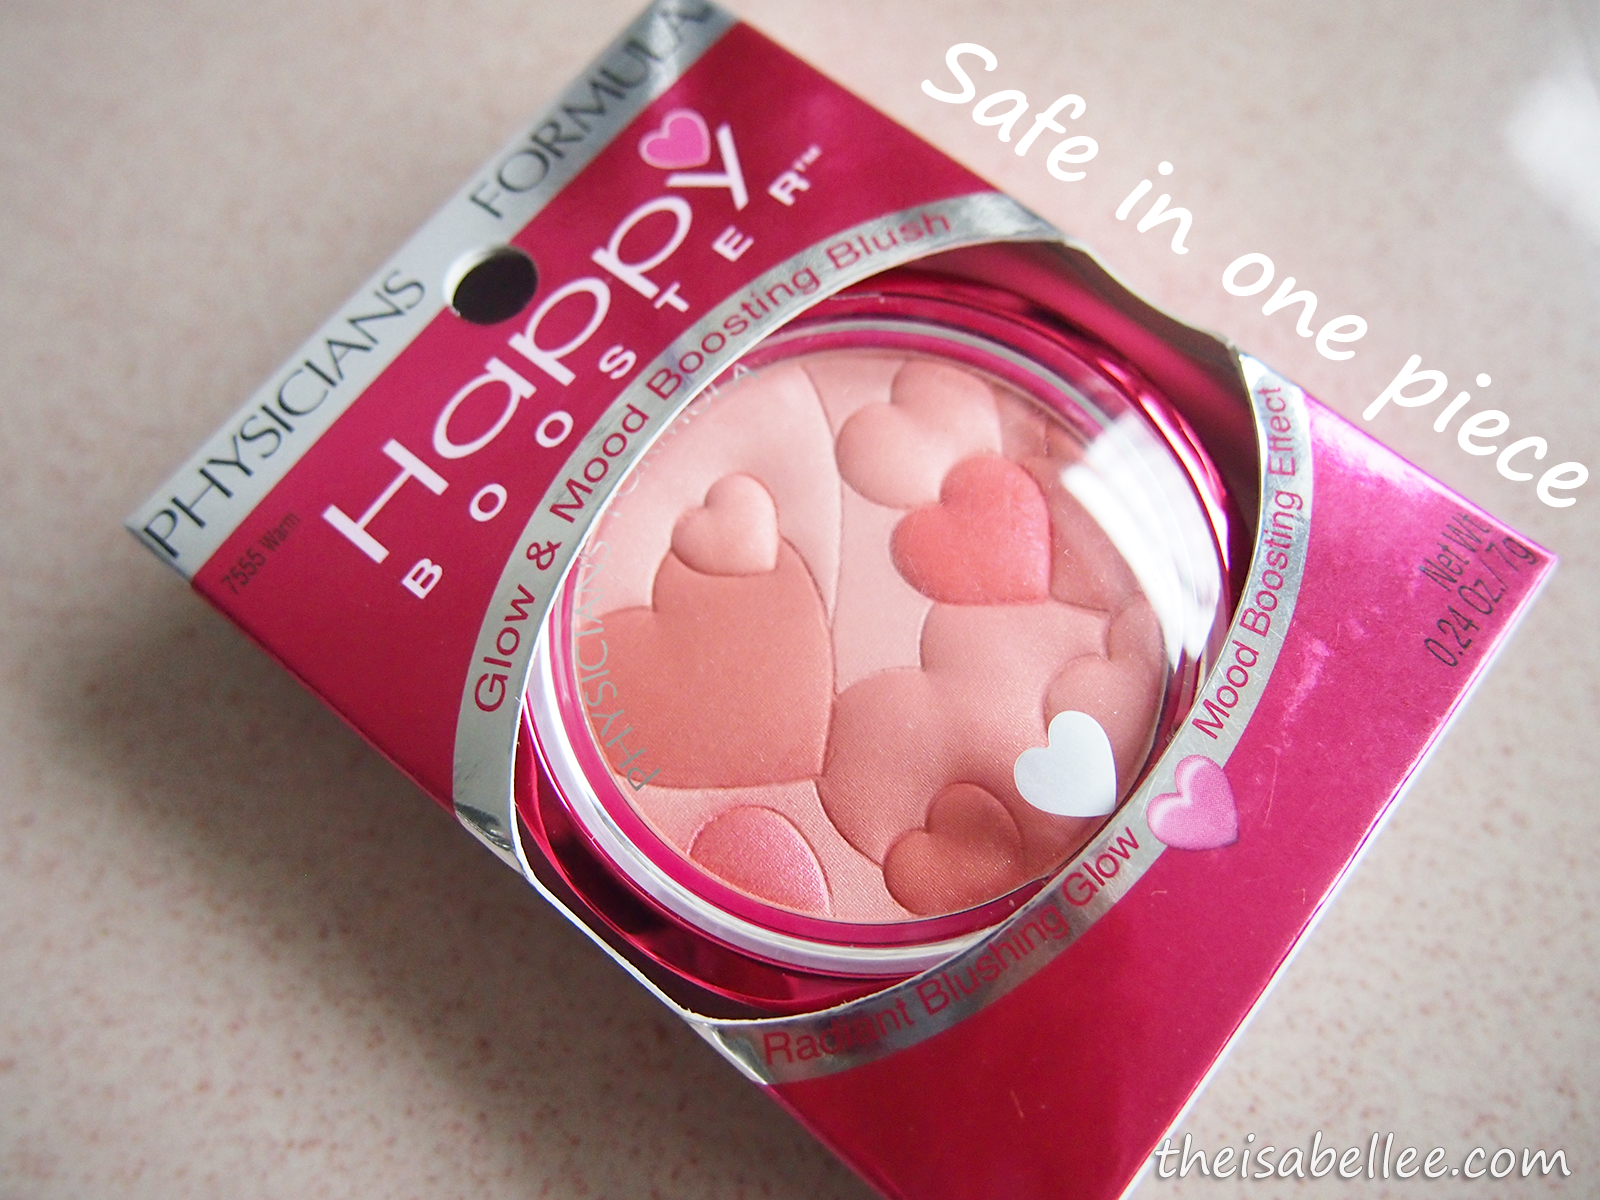 Physicians Formula Happy Booster blush